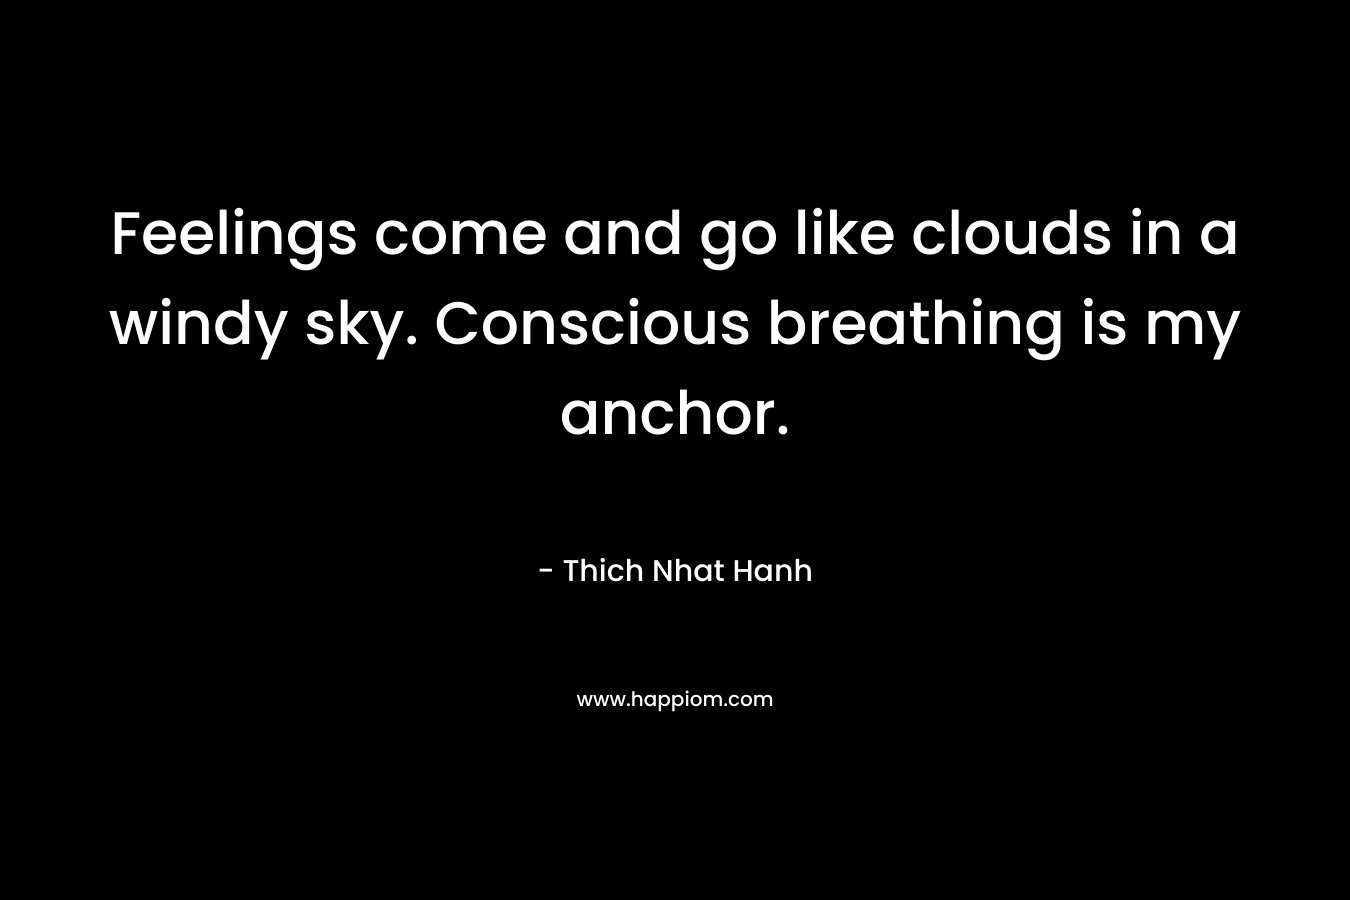 Feelings come and go like clouds in a windy sky. Conscious breathing is my anchor.